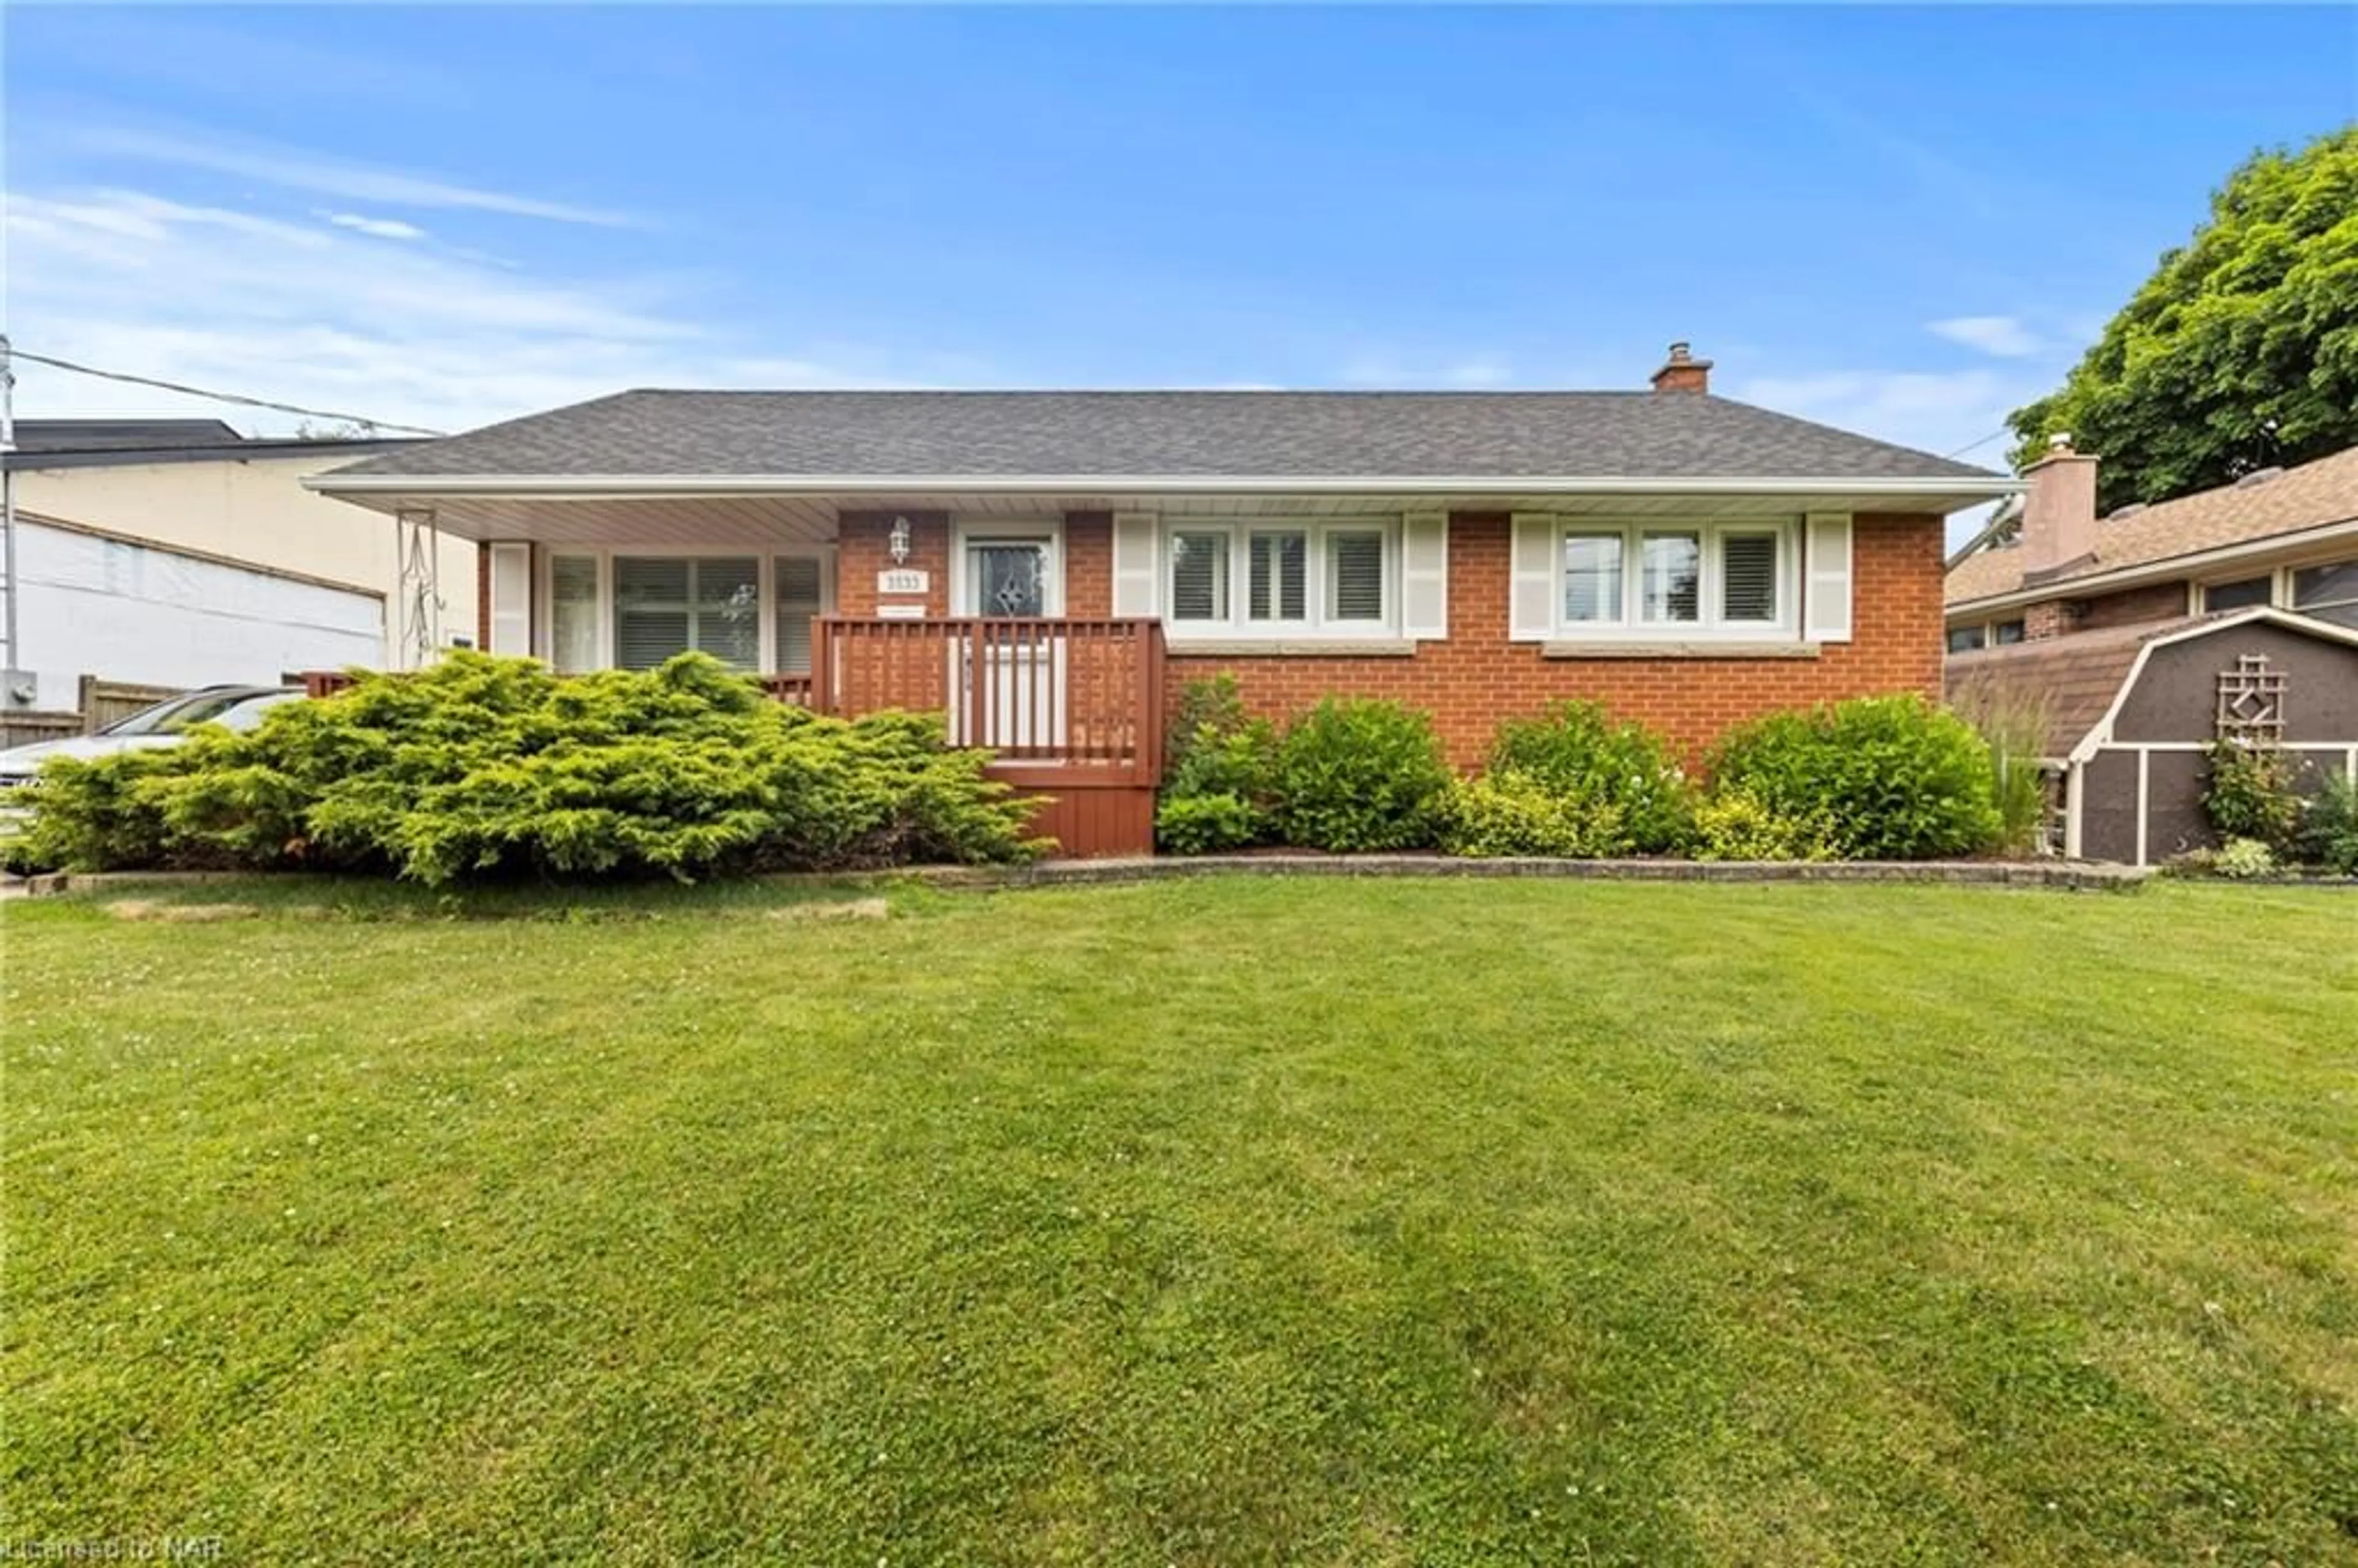 Frontside or backside of a home for 3533 Gainsborough Ave, Niagara Falls Ontario L2J 2T9